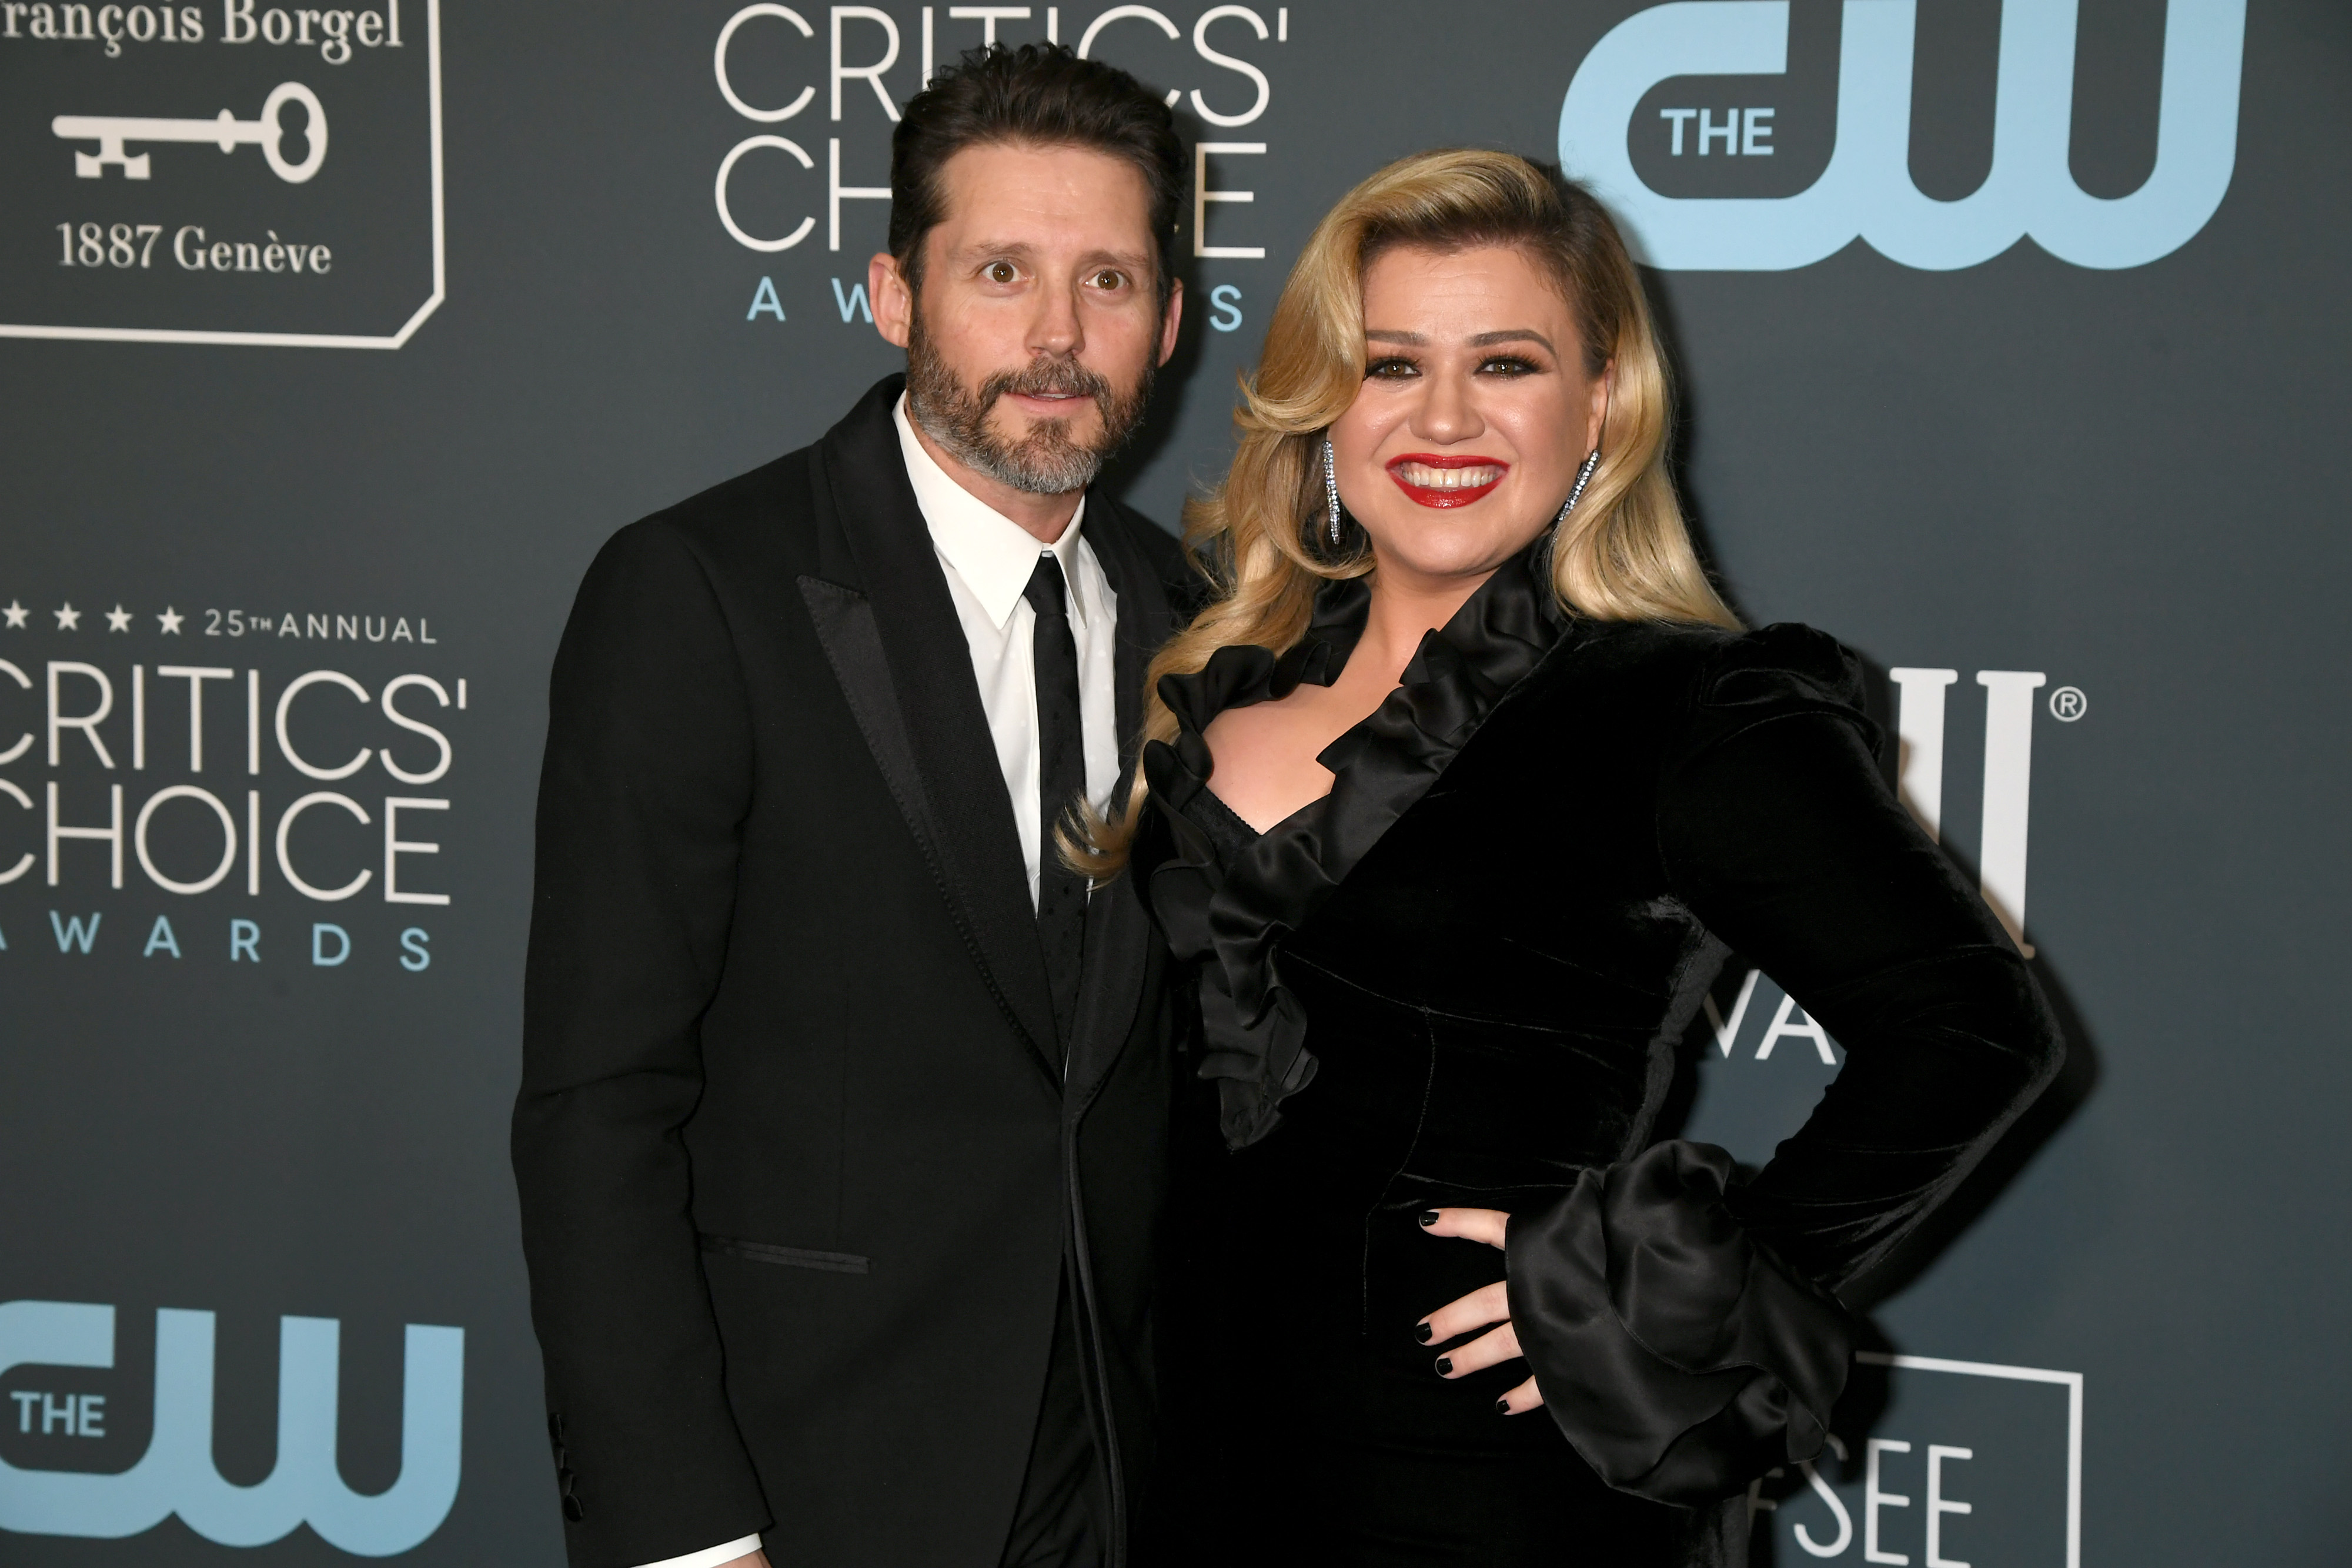 Brandon Blackstock and Kelly Clarkson attend the 25th Annual Critics' Choice Awards at Barker Hangar on January 12, 2020, in Santa Monica, California. | Source: Getty Images